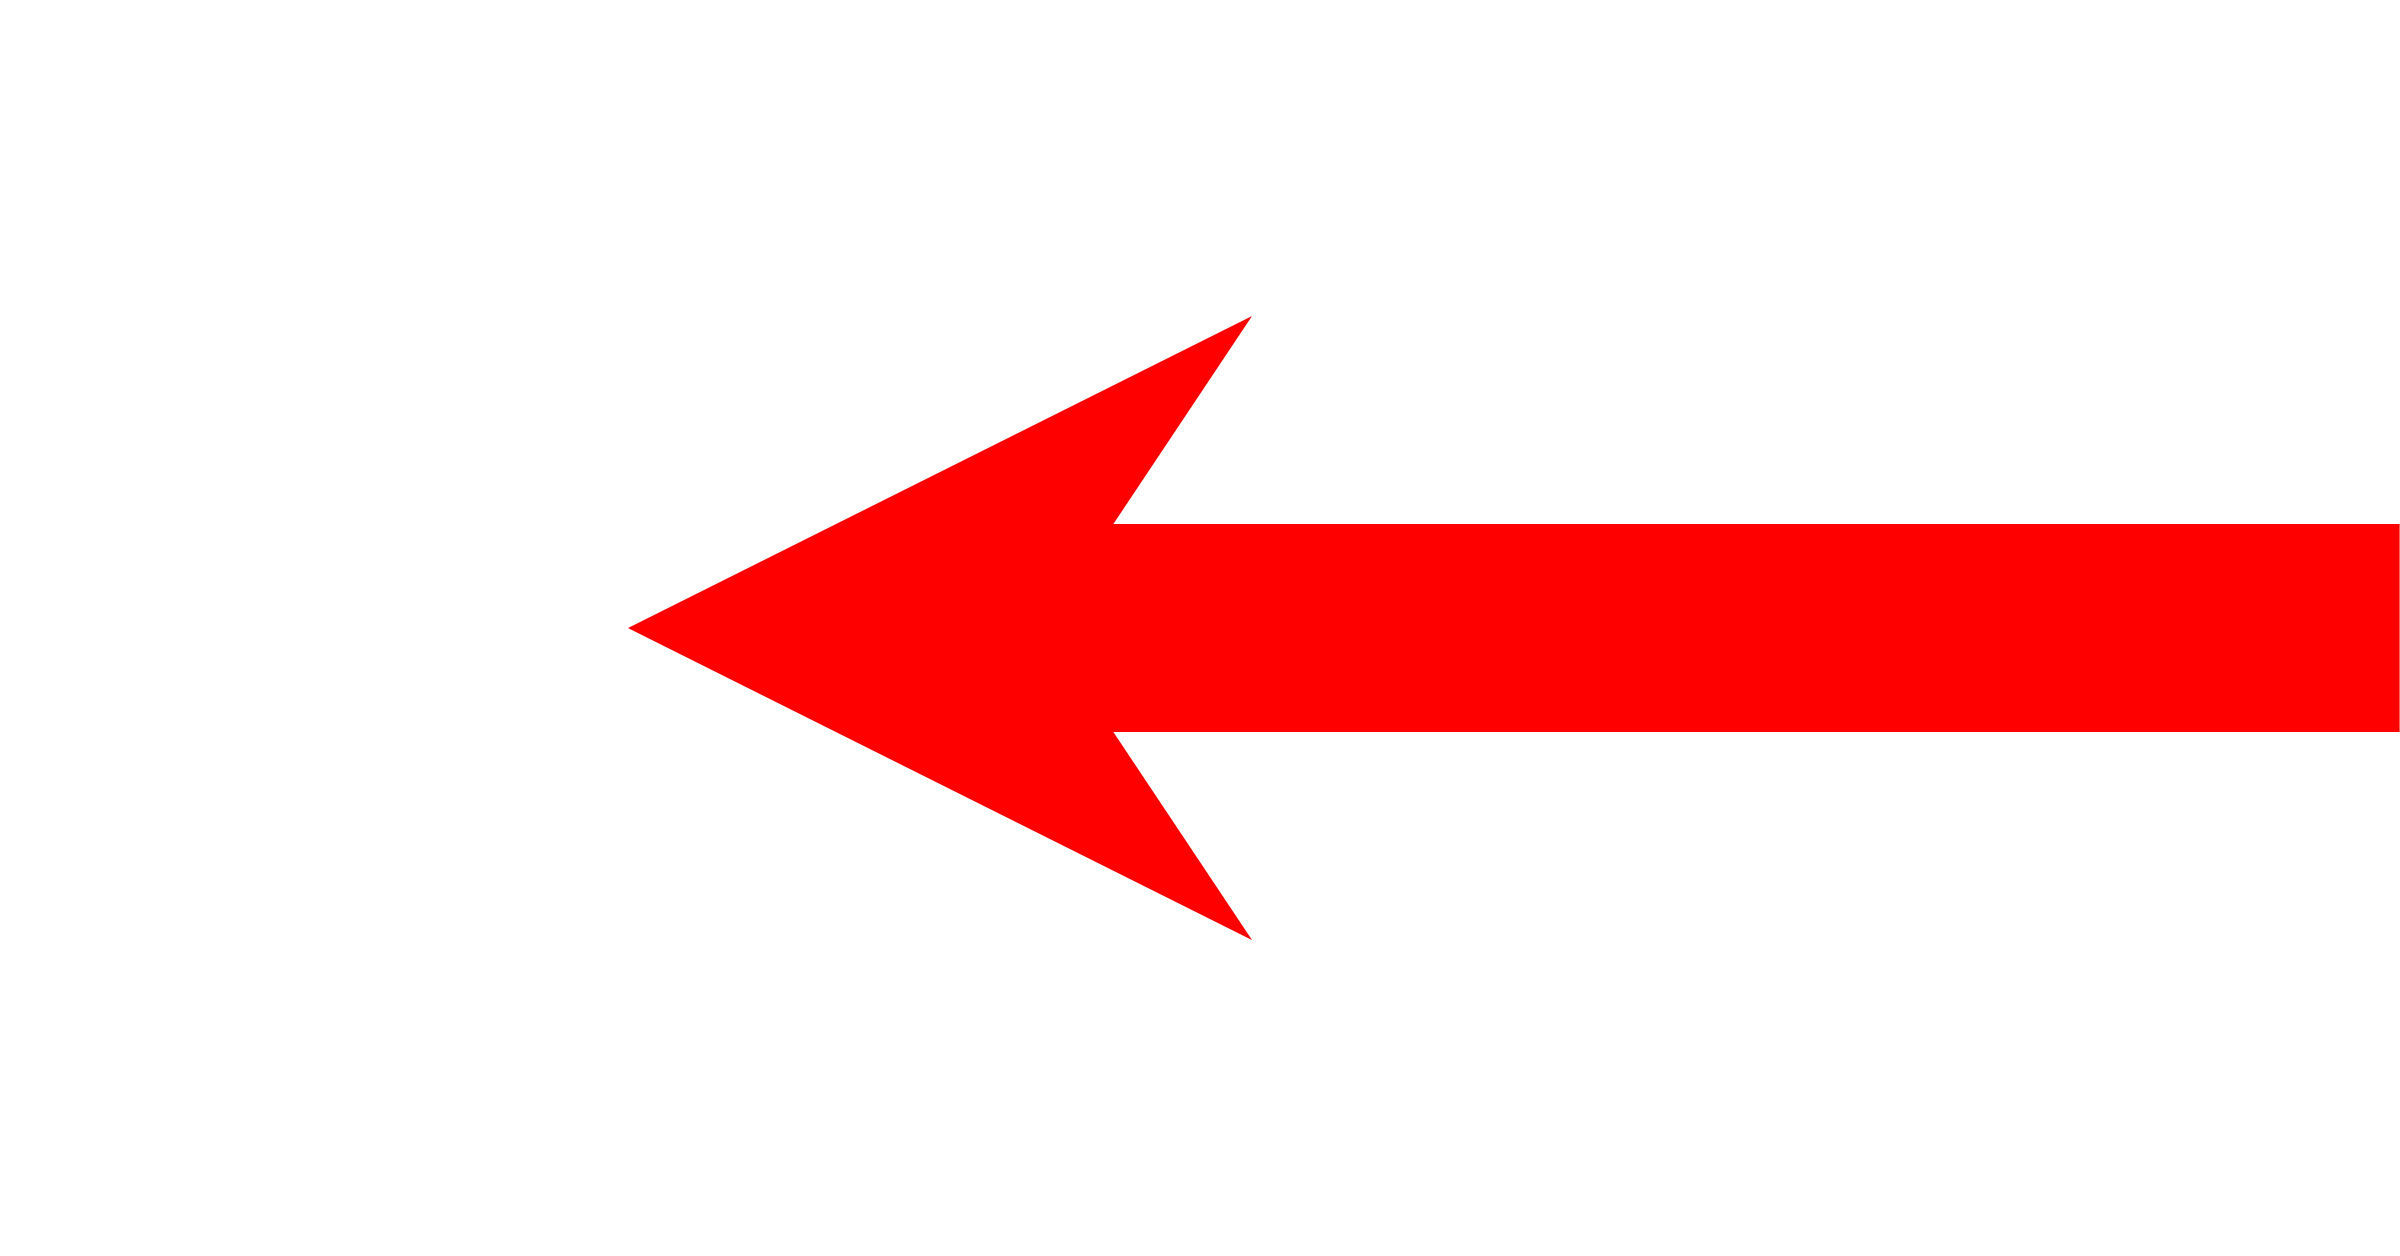 File:Short left arrow - red.png - Wikimedia Commons